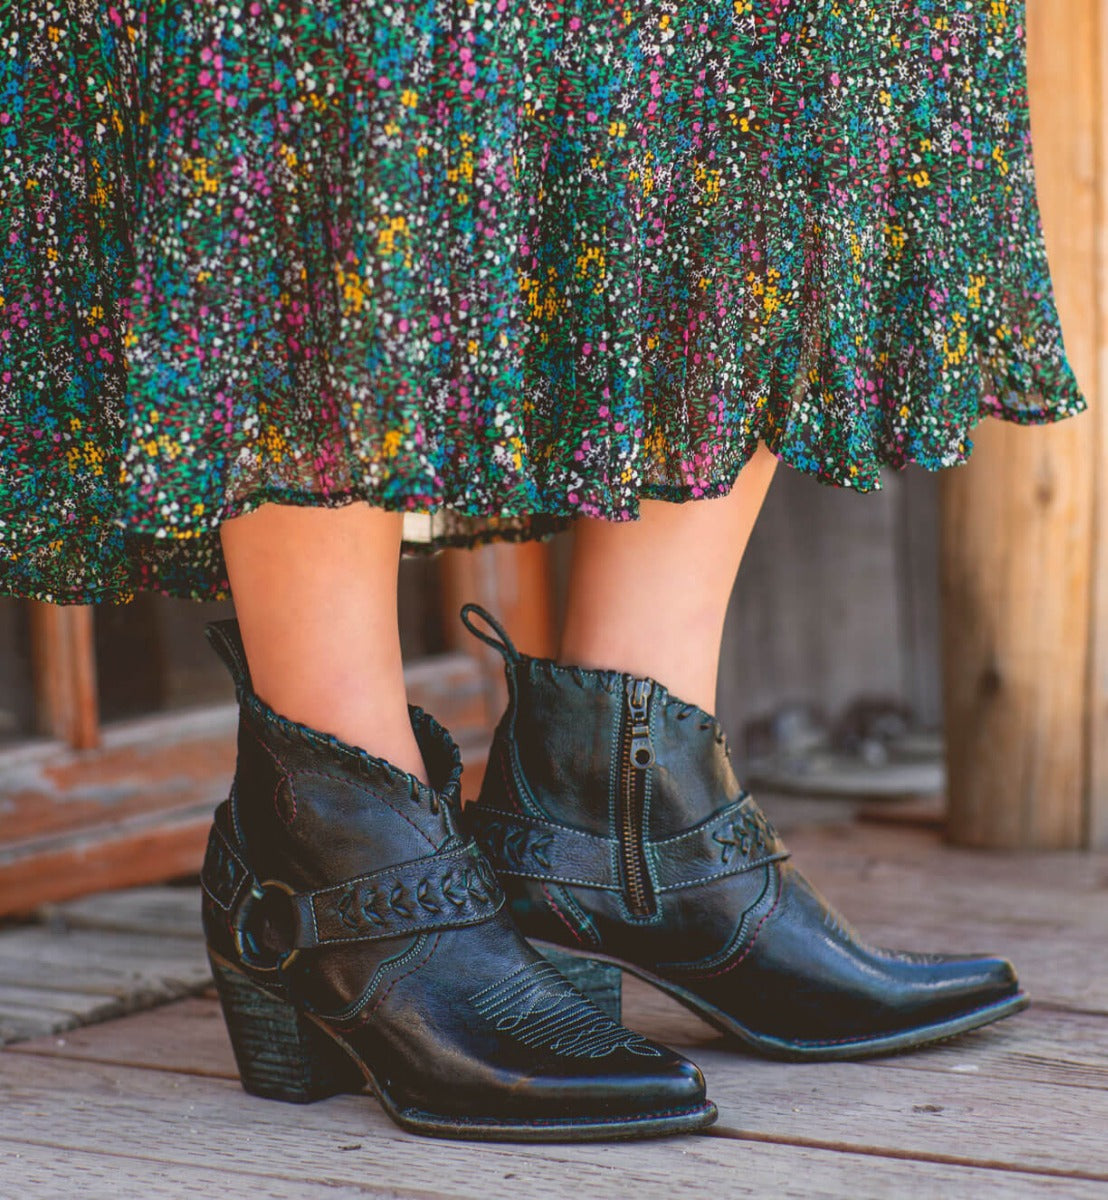 A woman wearing black Bed Stu cowboy boots and a floral skirt named Tania.